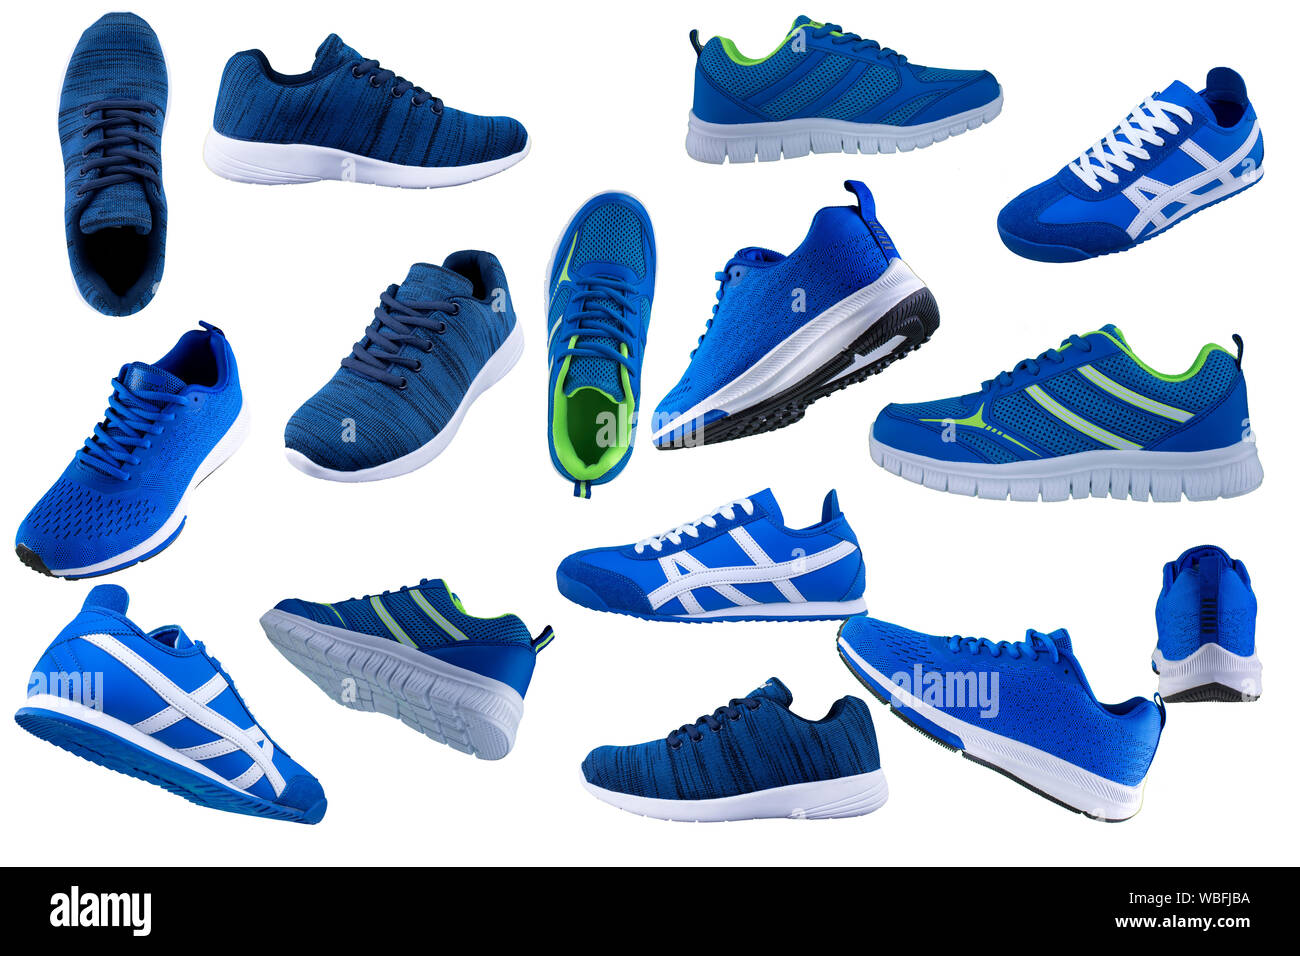 Sneaker store display Cut Out Stock Images & Pictures - Alamy